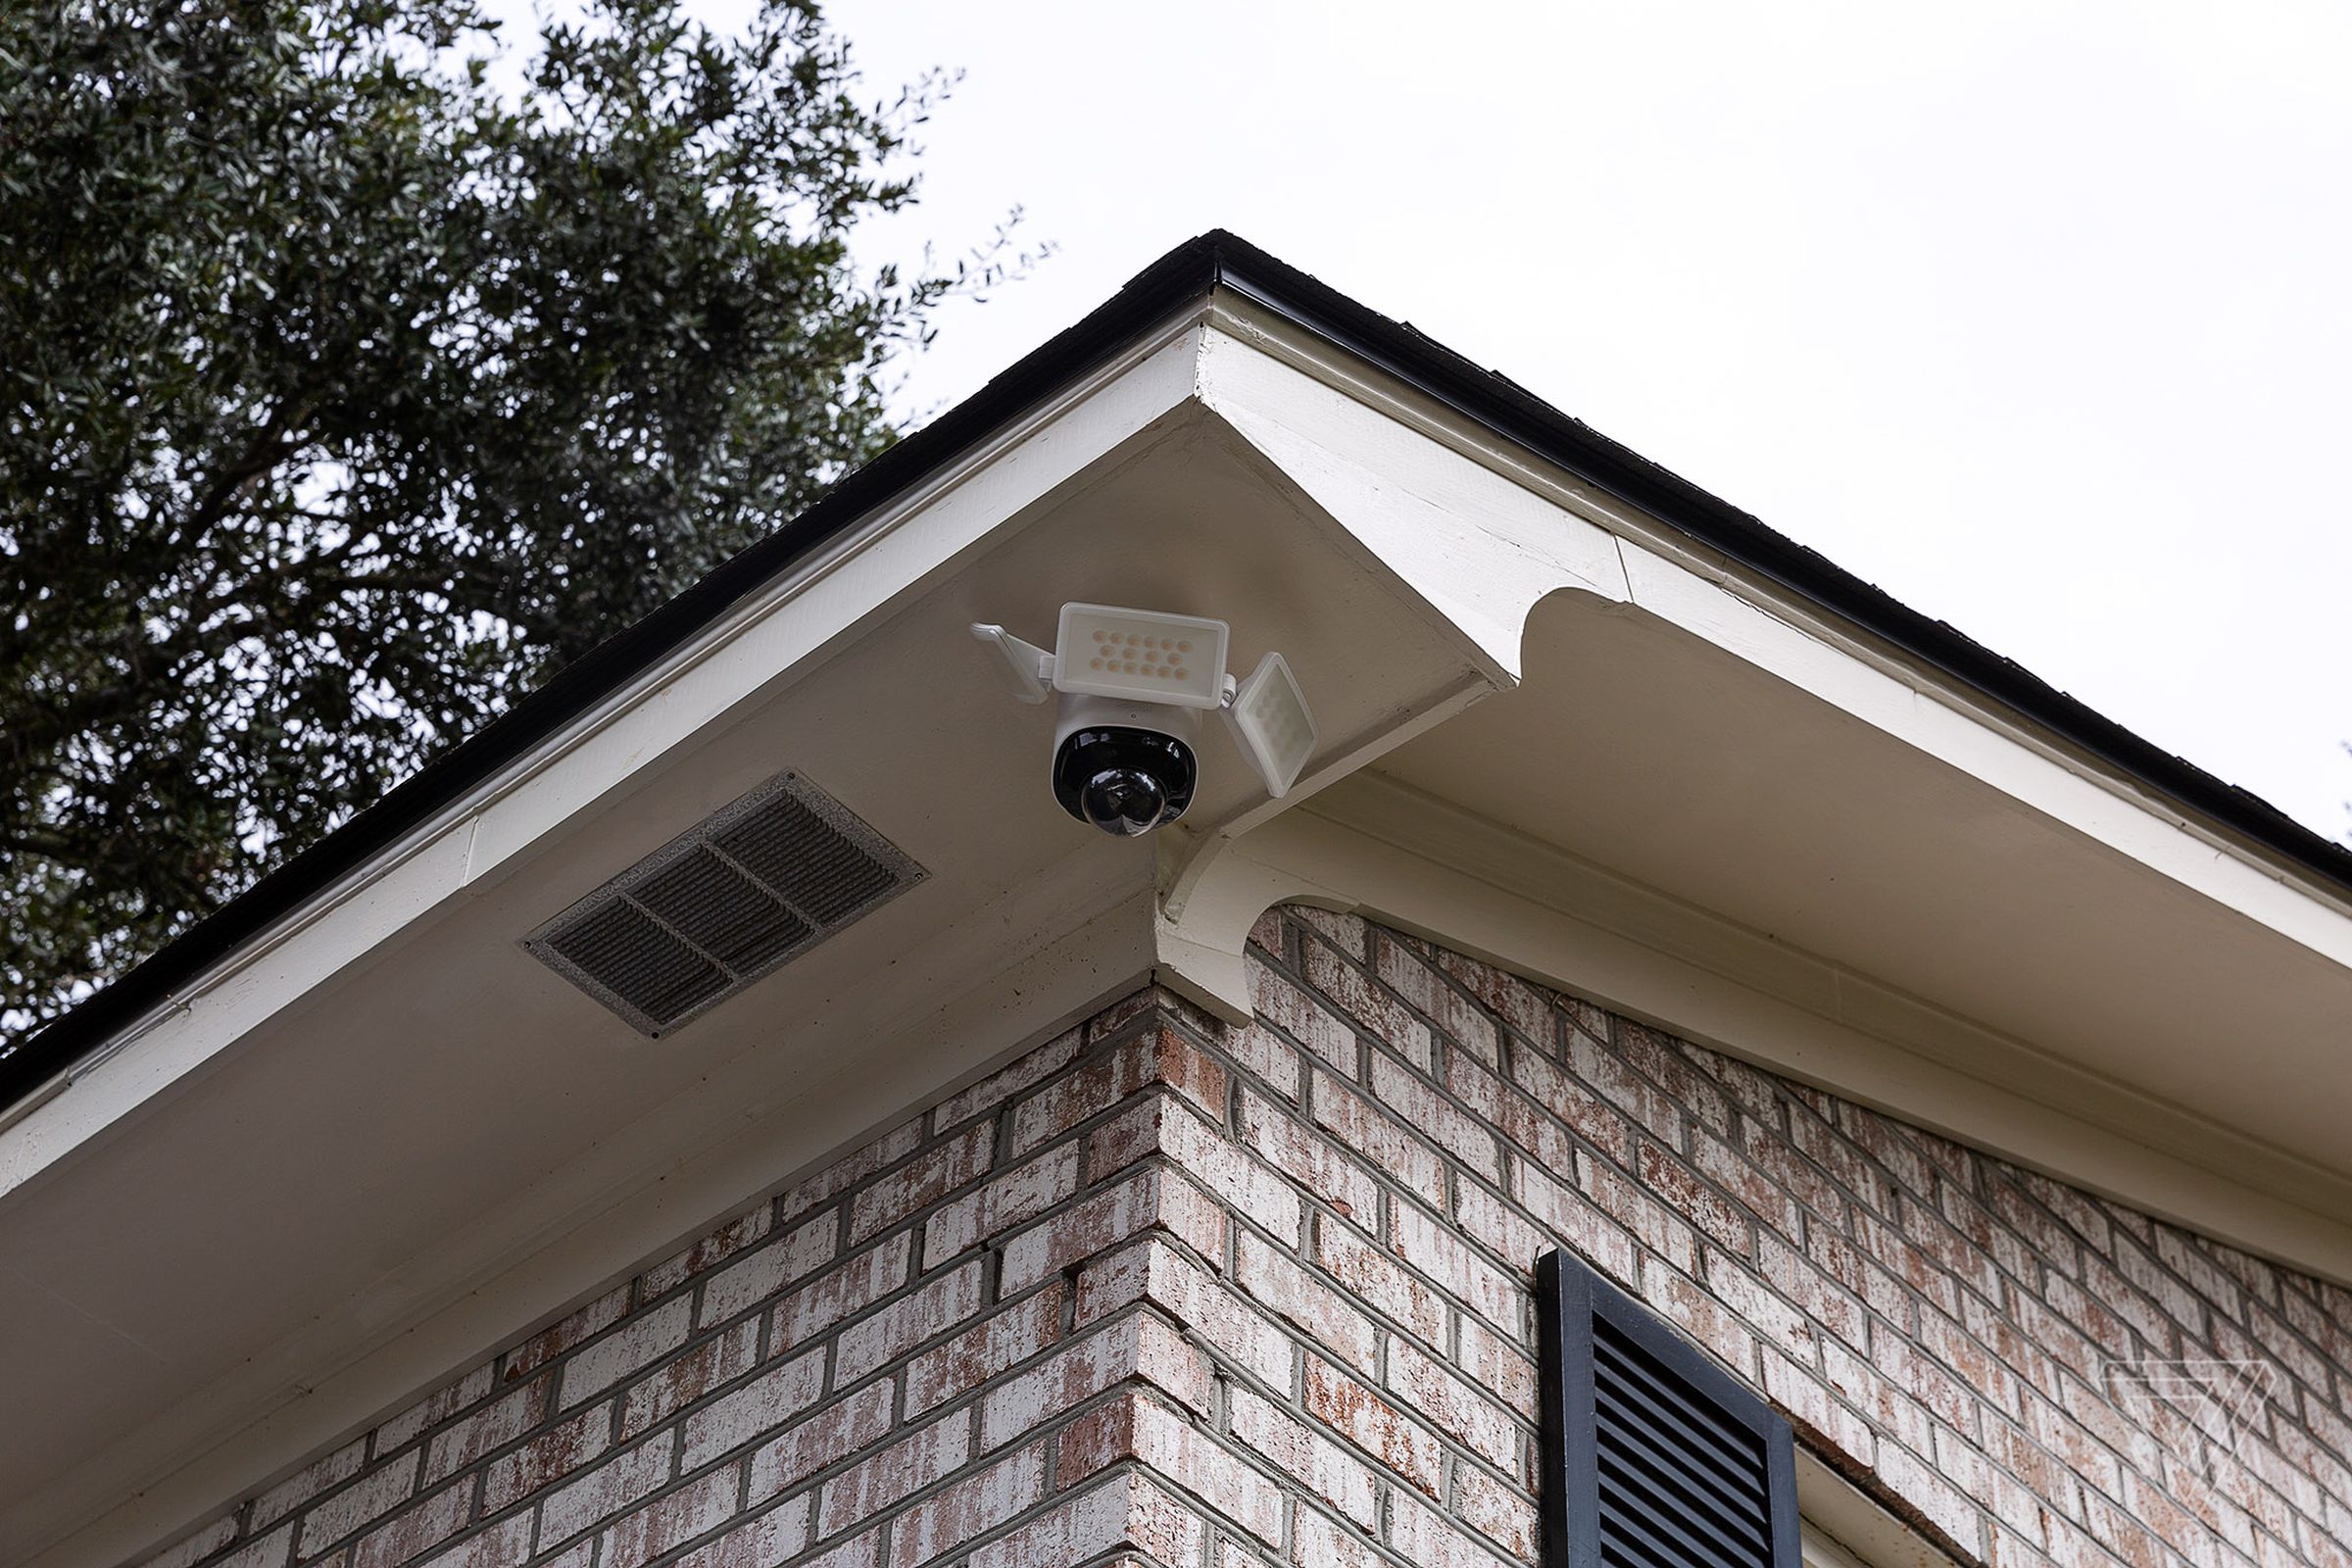 The Eufy Floodlight Camera looks and works best when it’s tucked way up high, out of your line of sight.